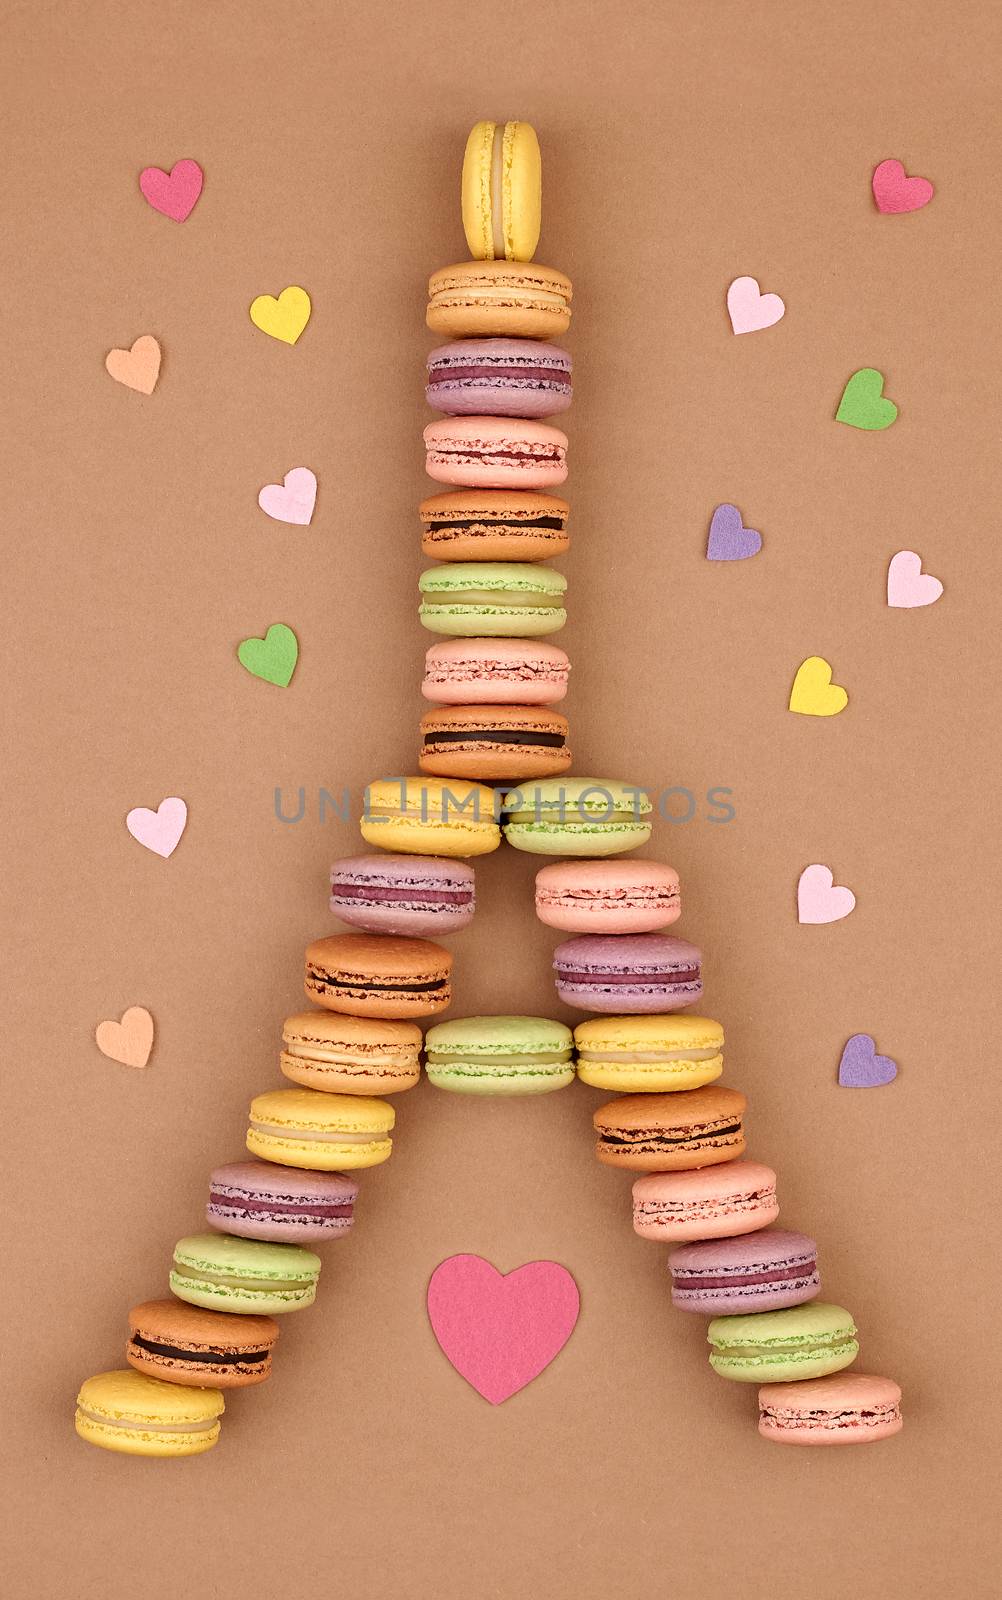 Macarons. Still life. Eiffel Tower french sweet colorful, hearts. Fresh pastel delicious dessert, chocolate retro vintage background.Love,Valentines Day,romantic                                       